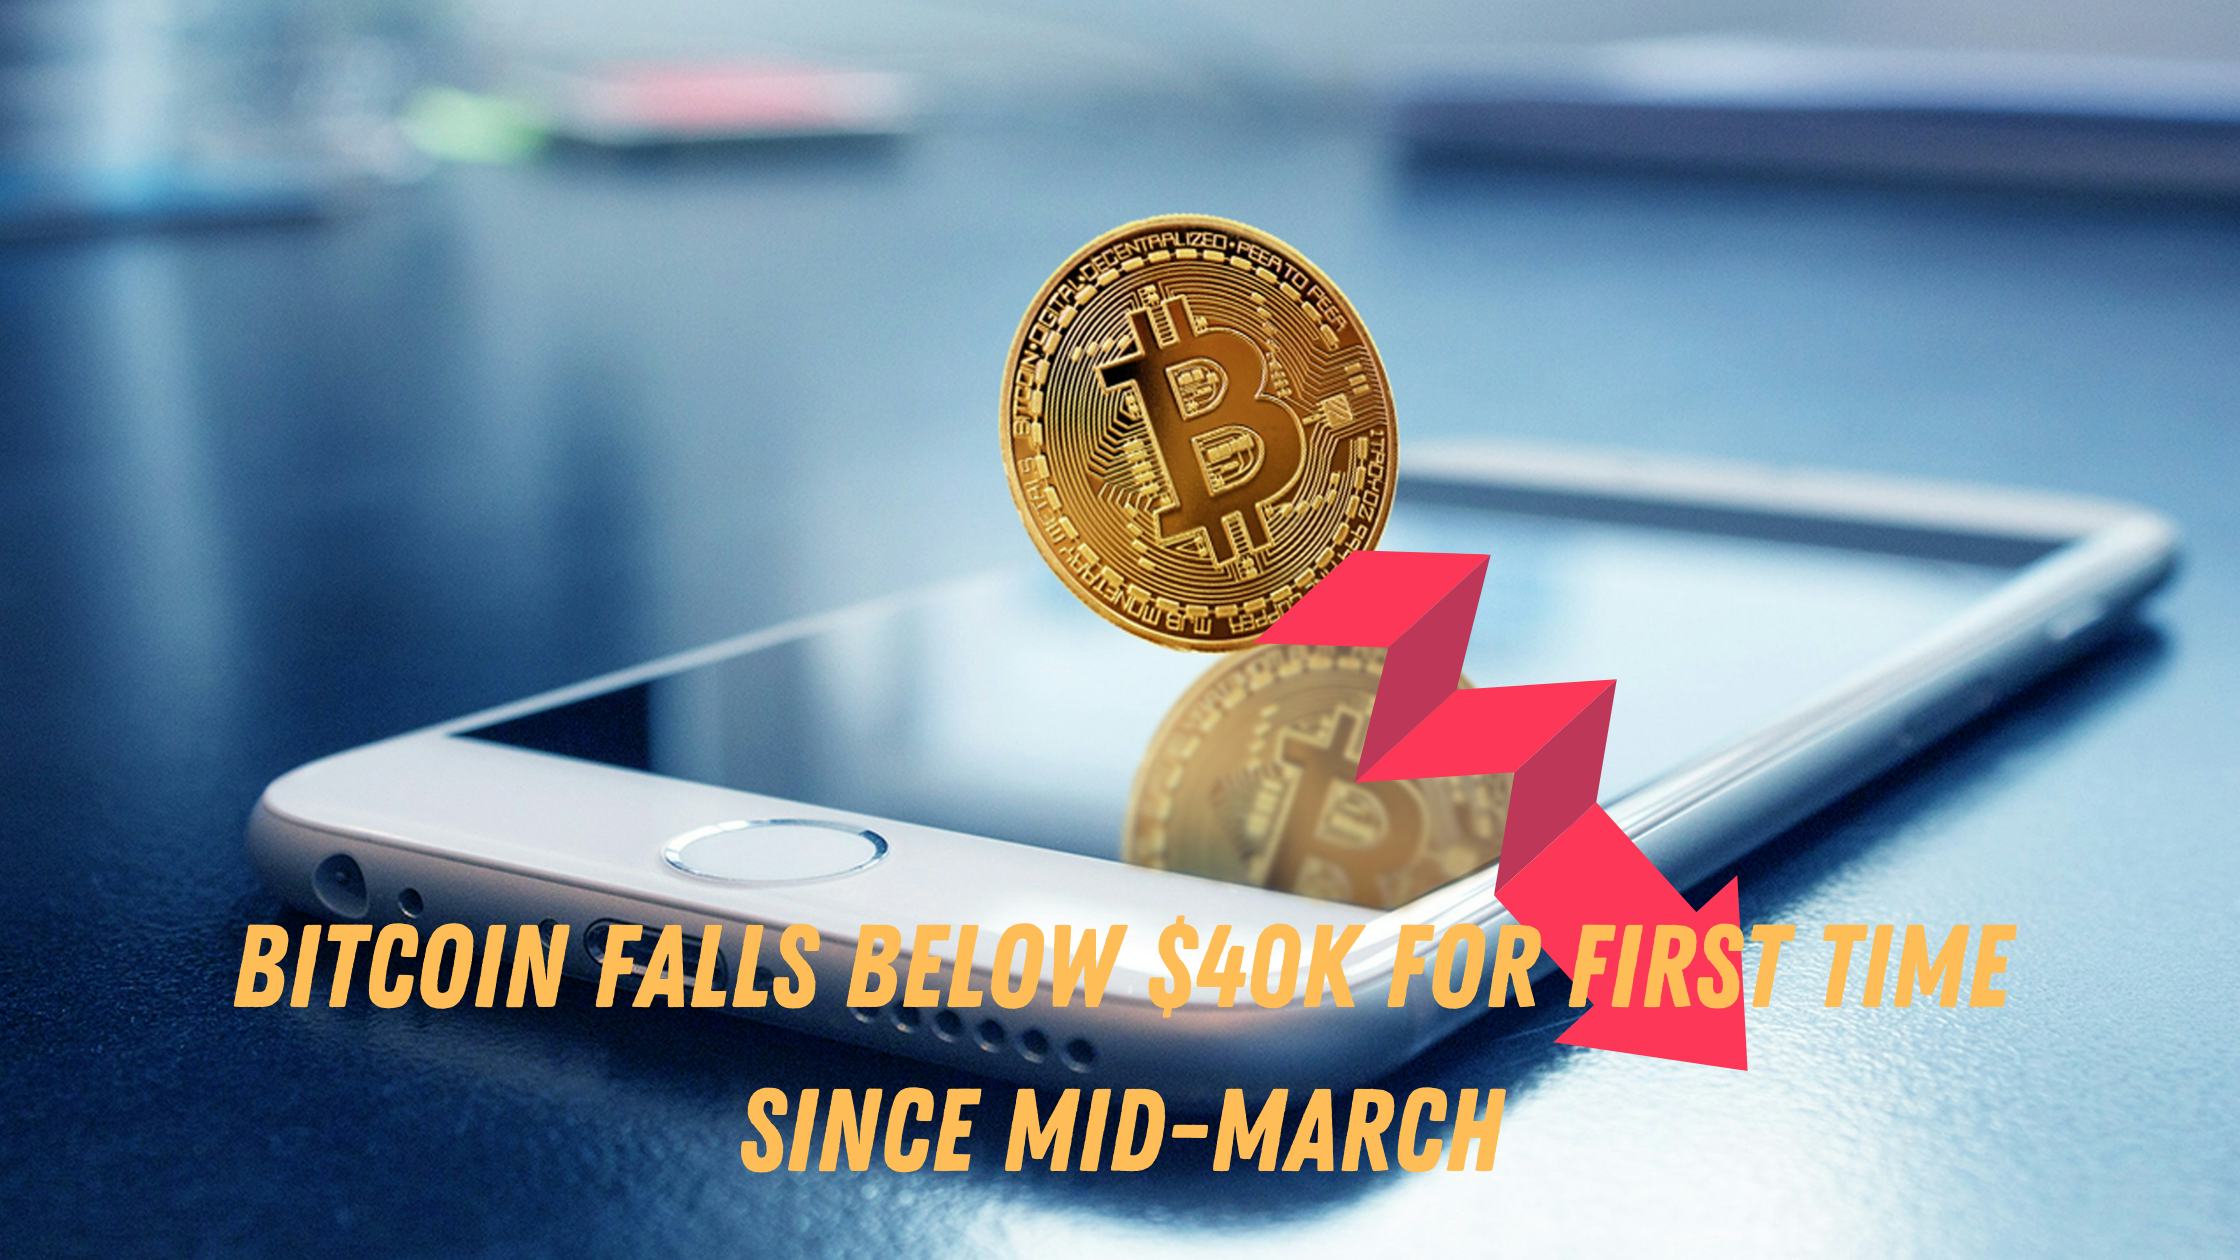 Bitcoin Falls Below $40K for First Time Since Mid-March